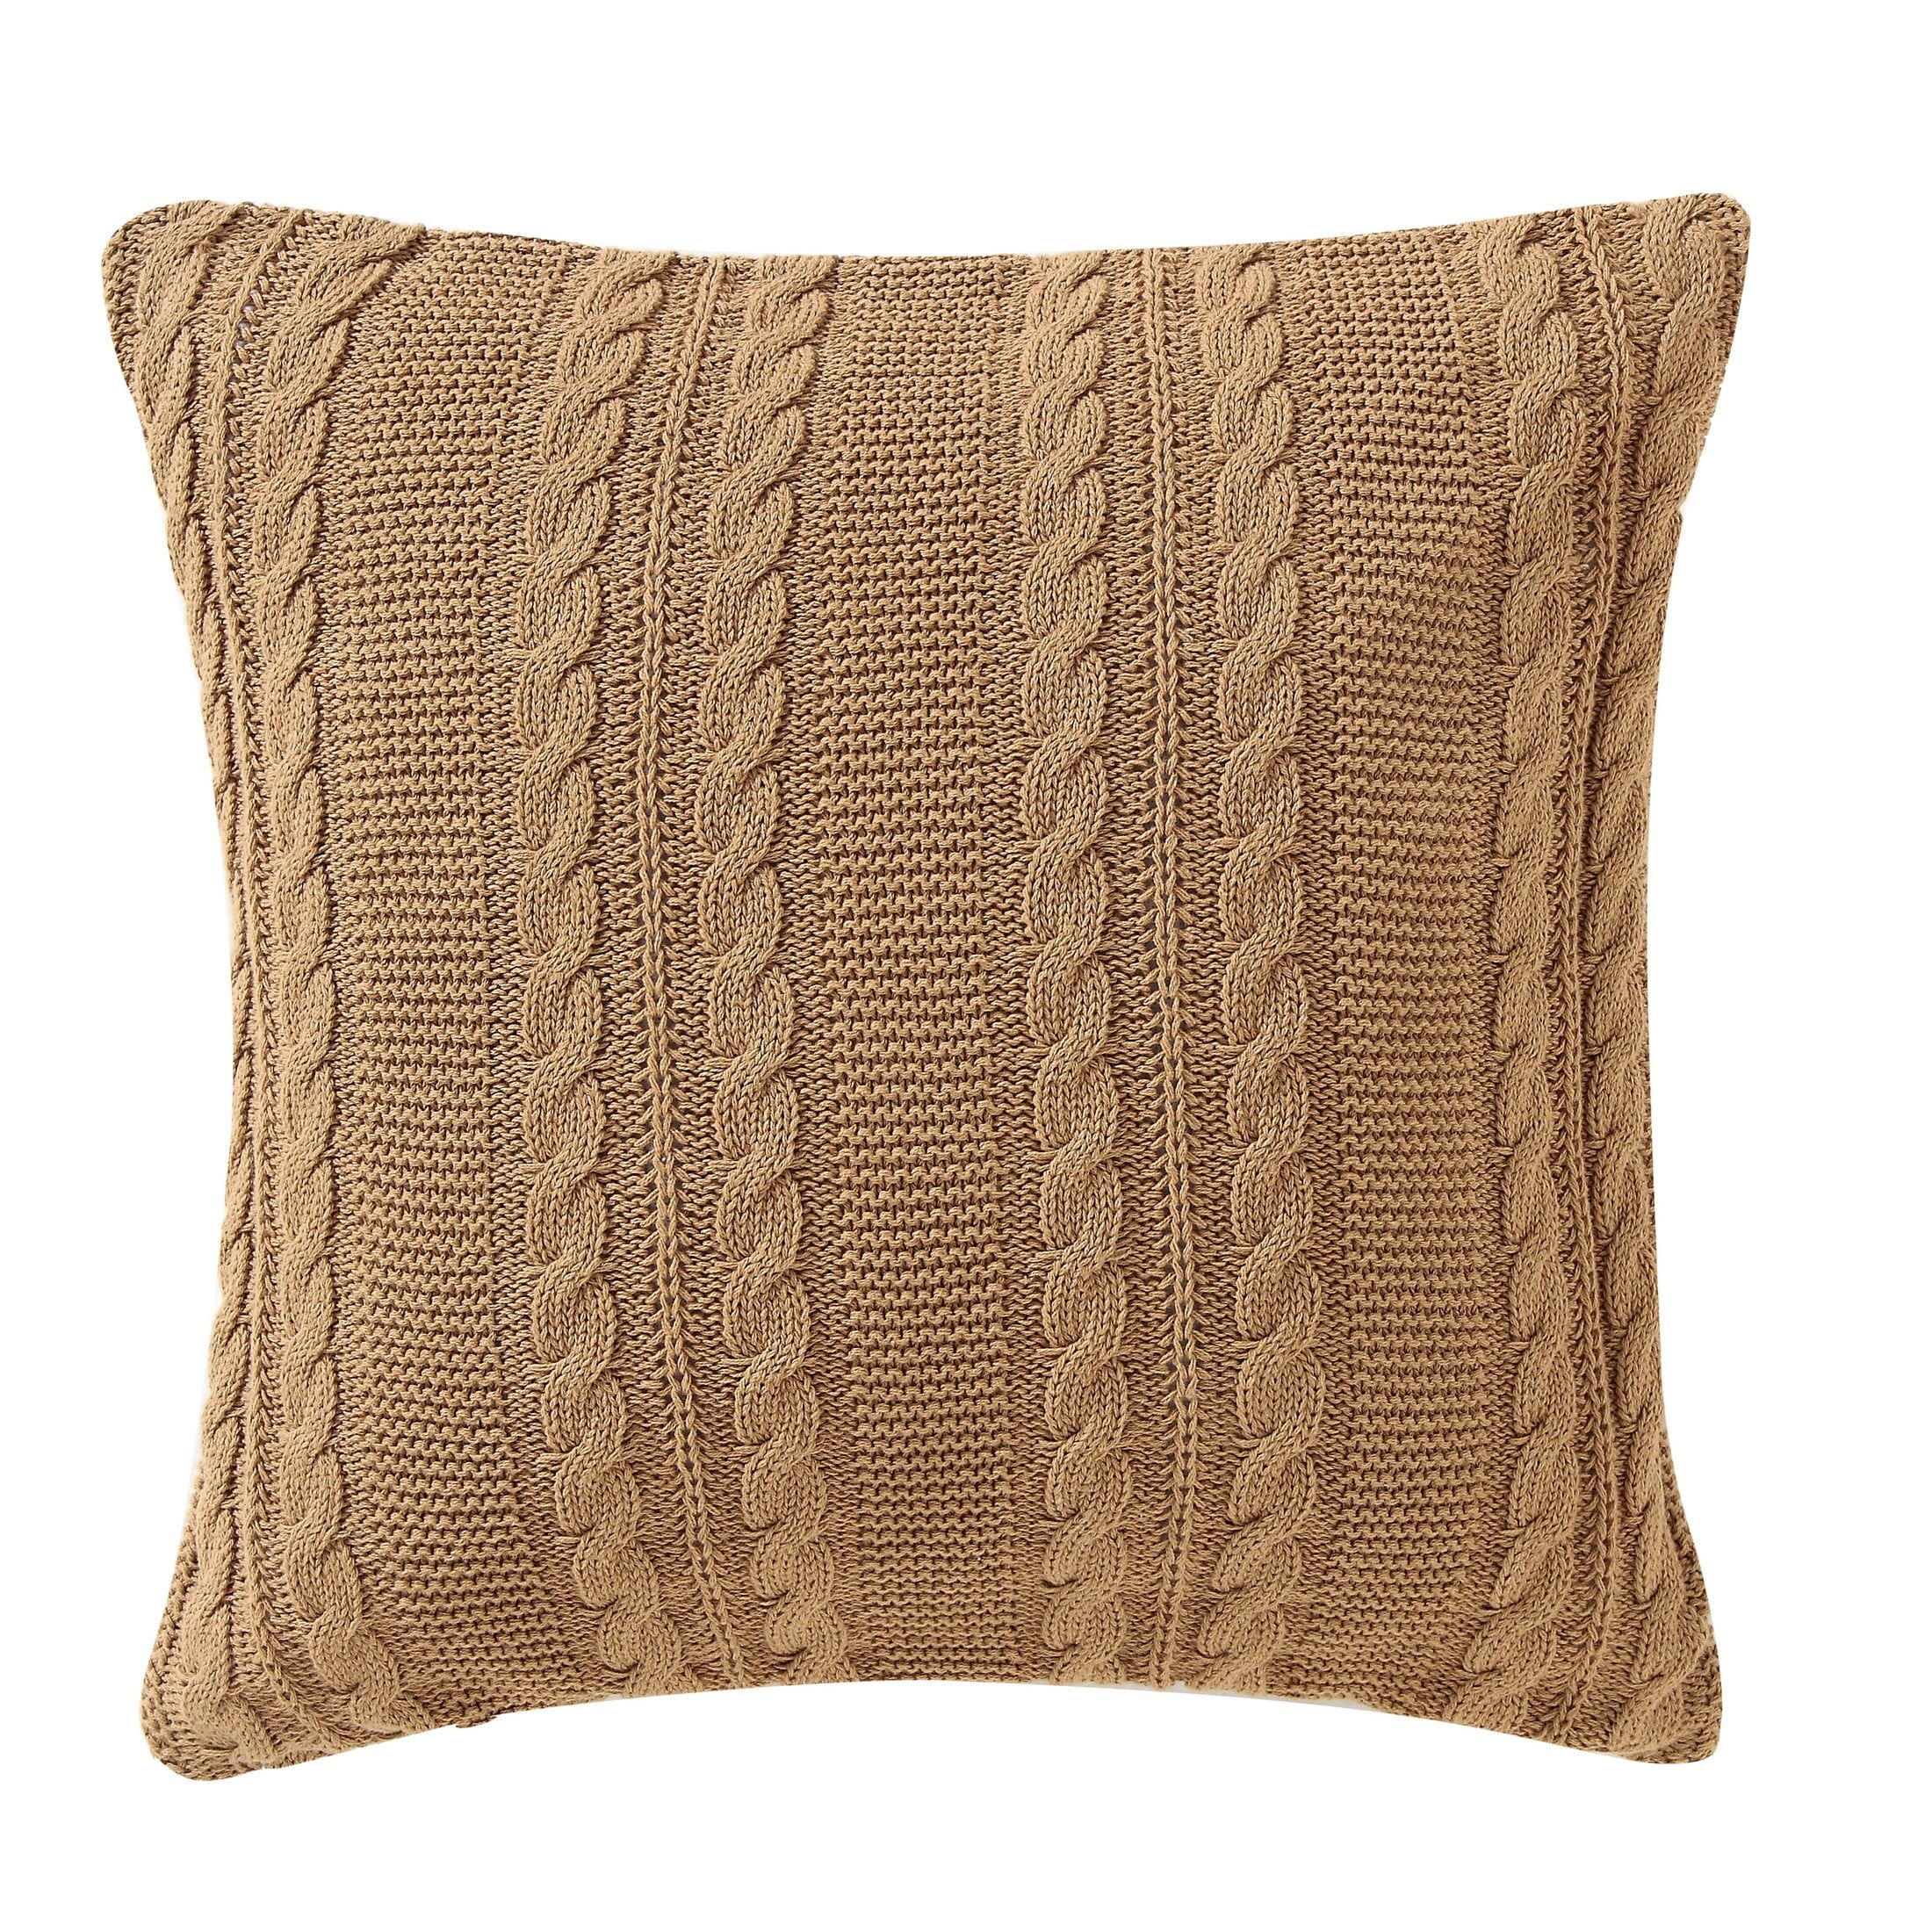 VCNY Home Dublin Cable Knit Square Decorative Throw Pillow, 18" x 18", Taupe | Walmart (US)